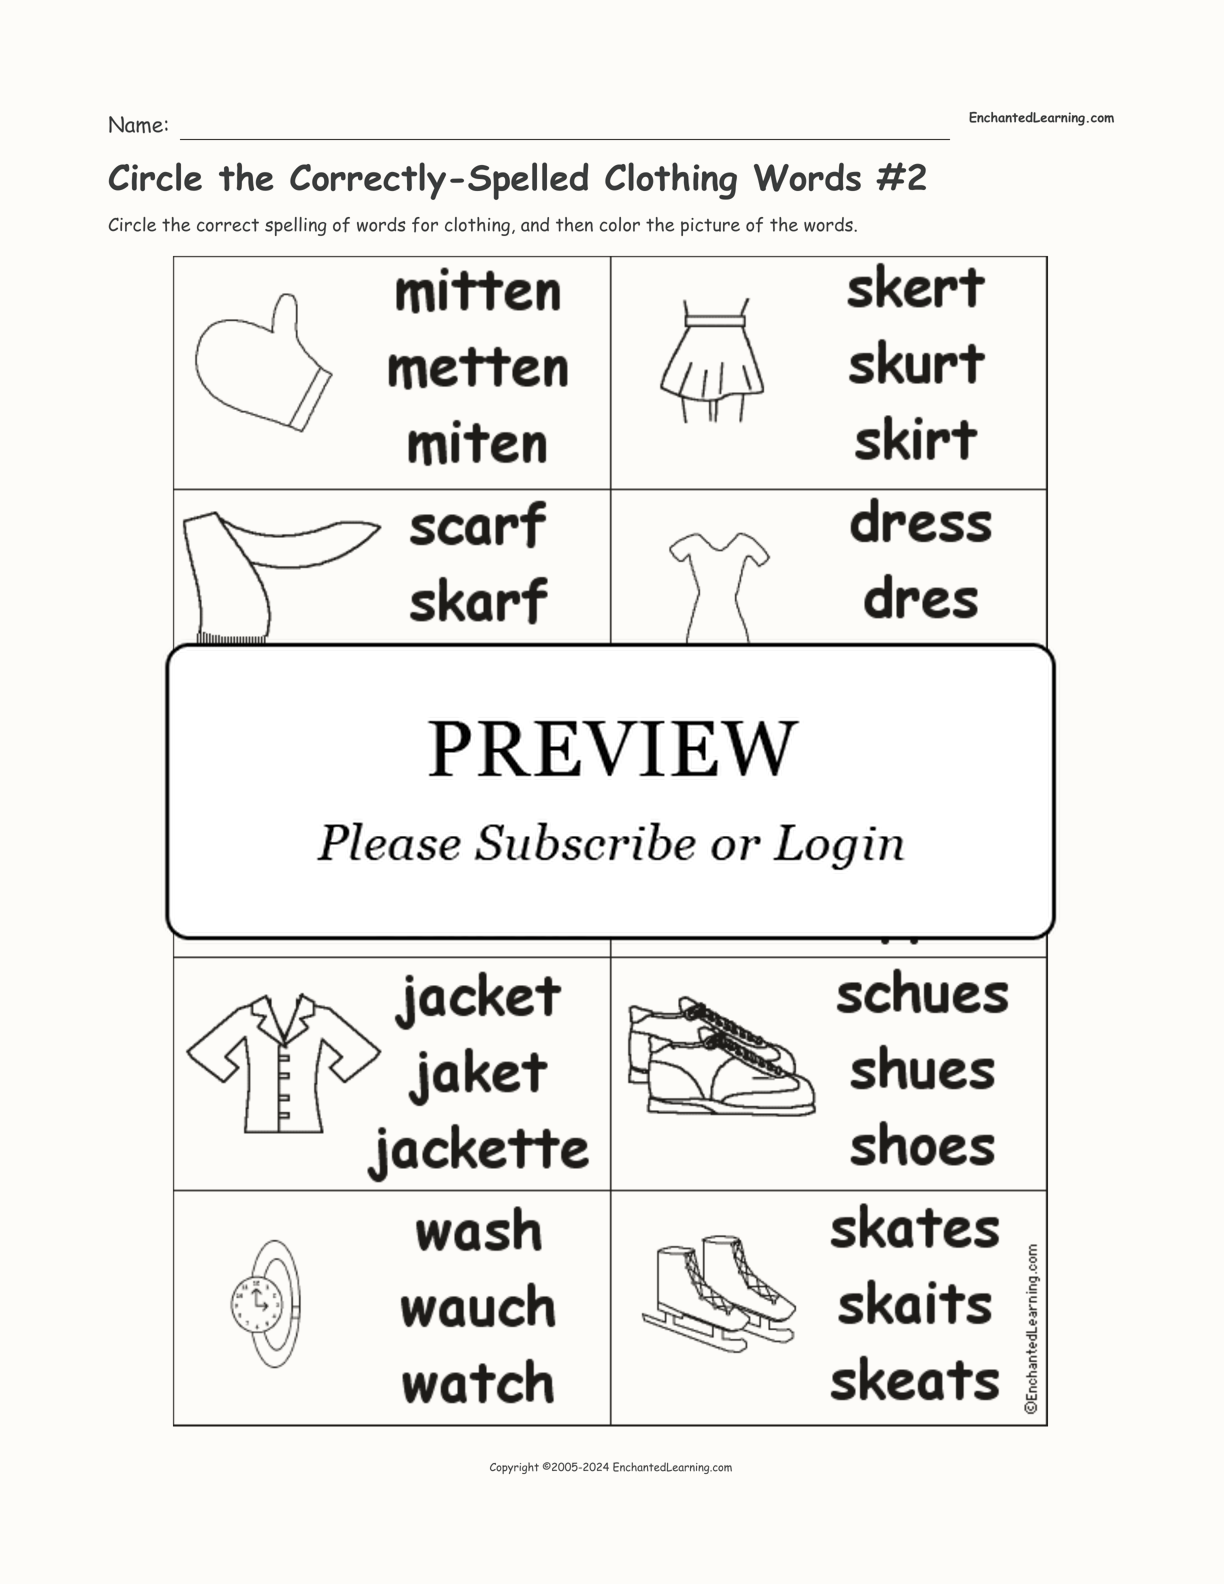 Circle the Correctly-Spelled Clothing Words #2 interactive worksheet page 1